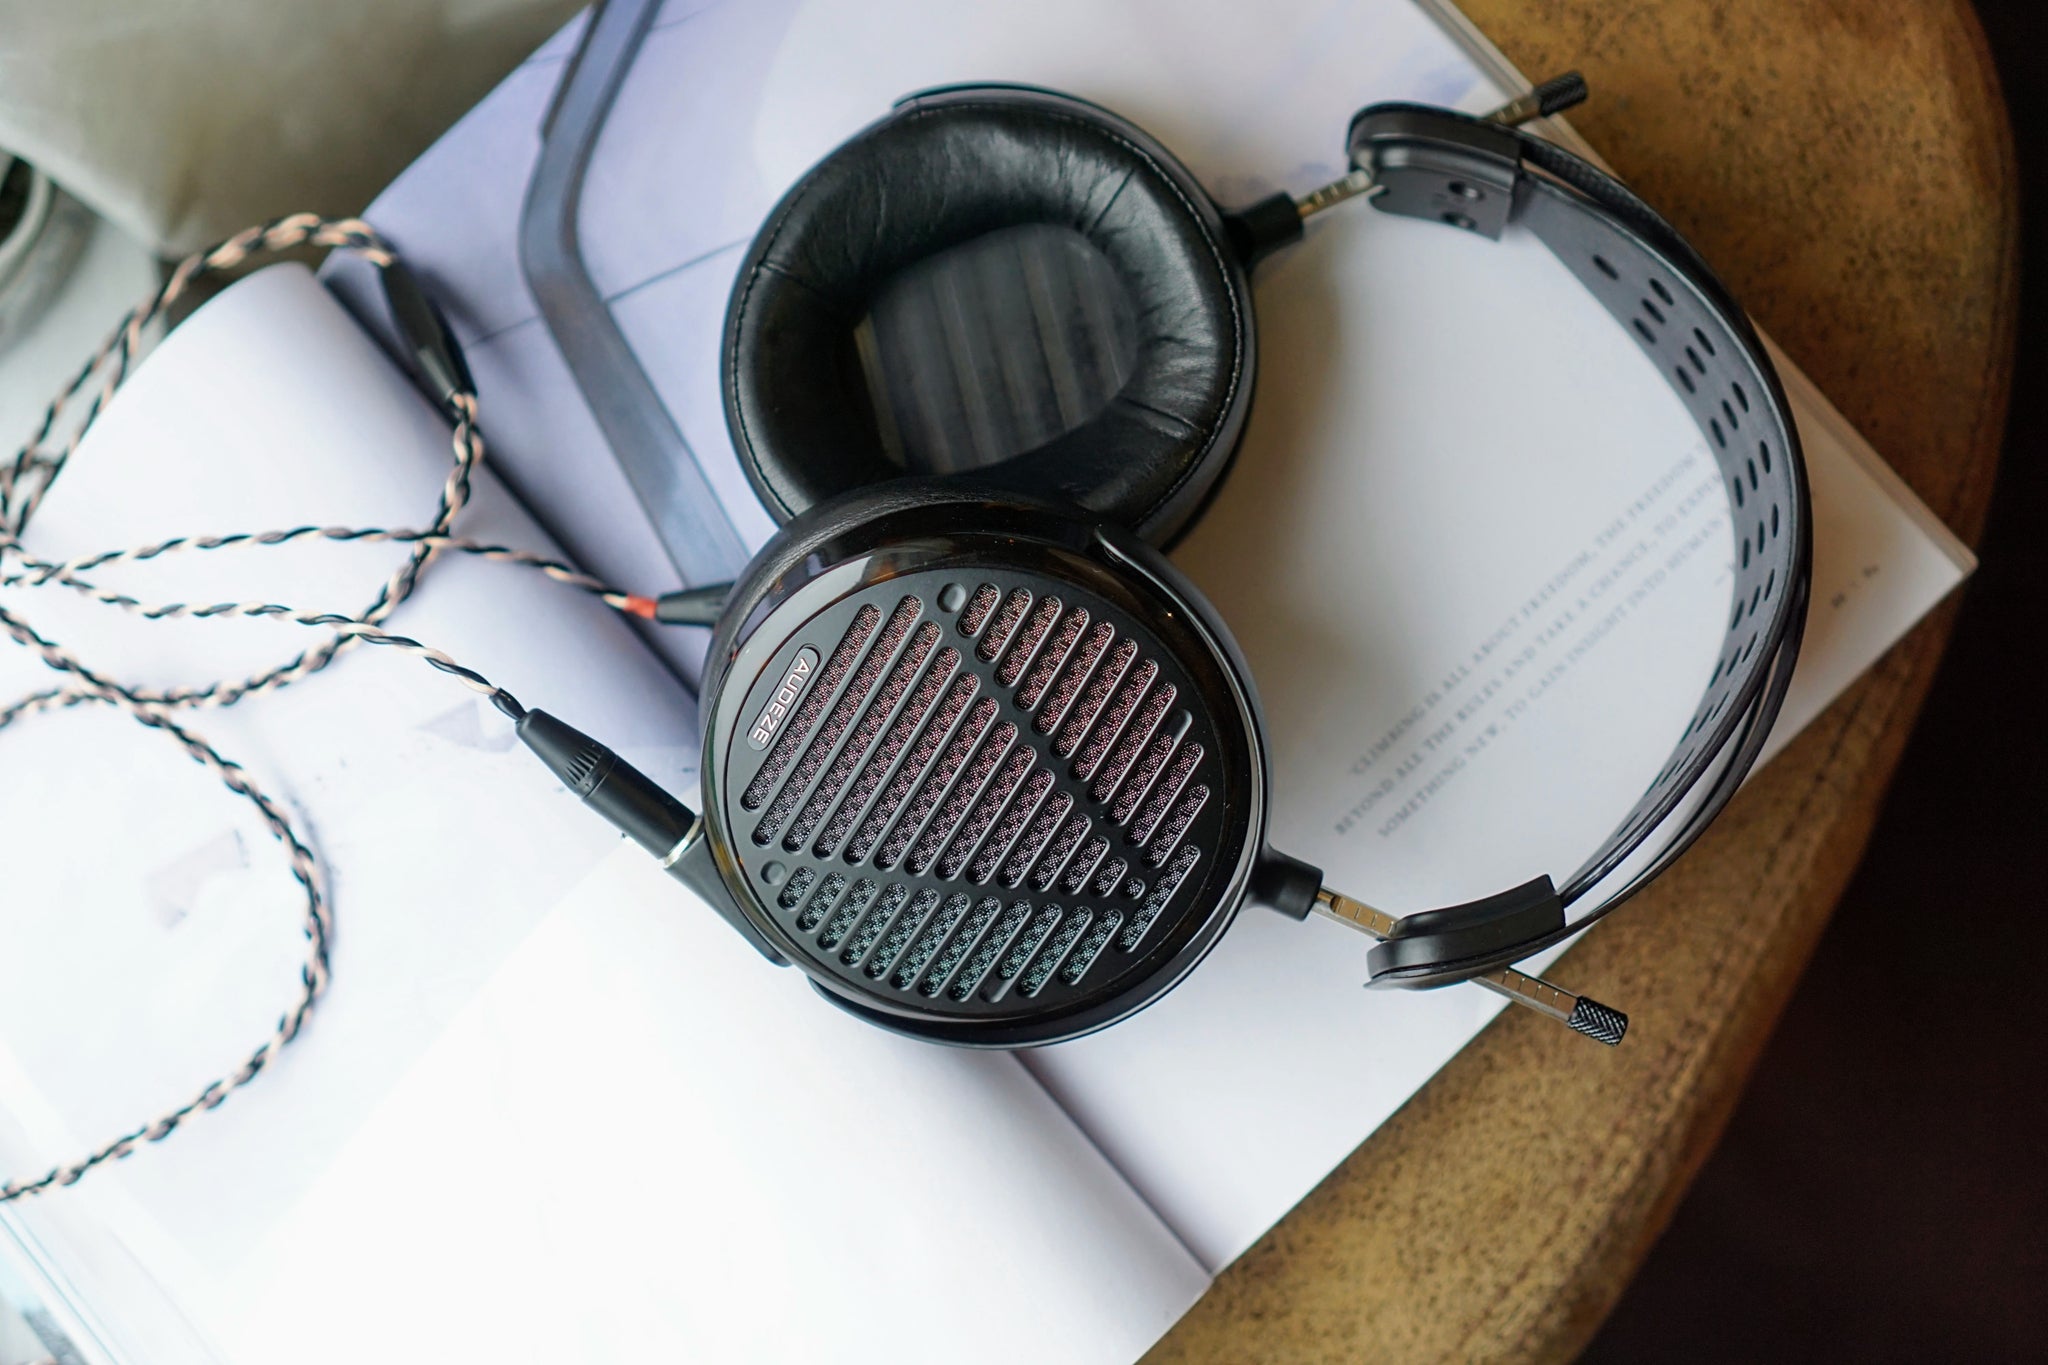 Audeze LCD-5 | The Reinvented LCD